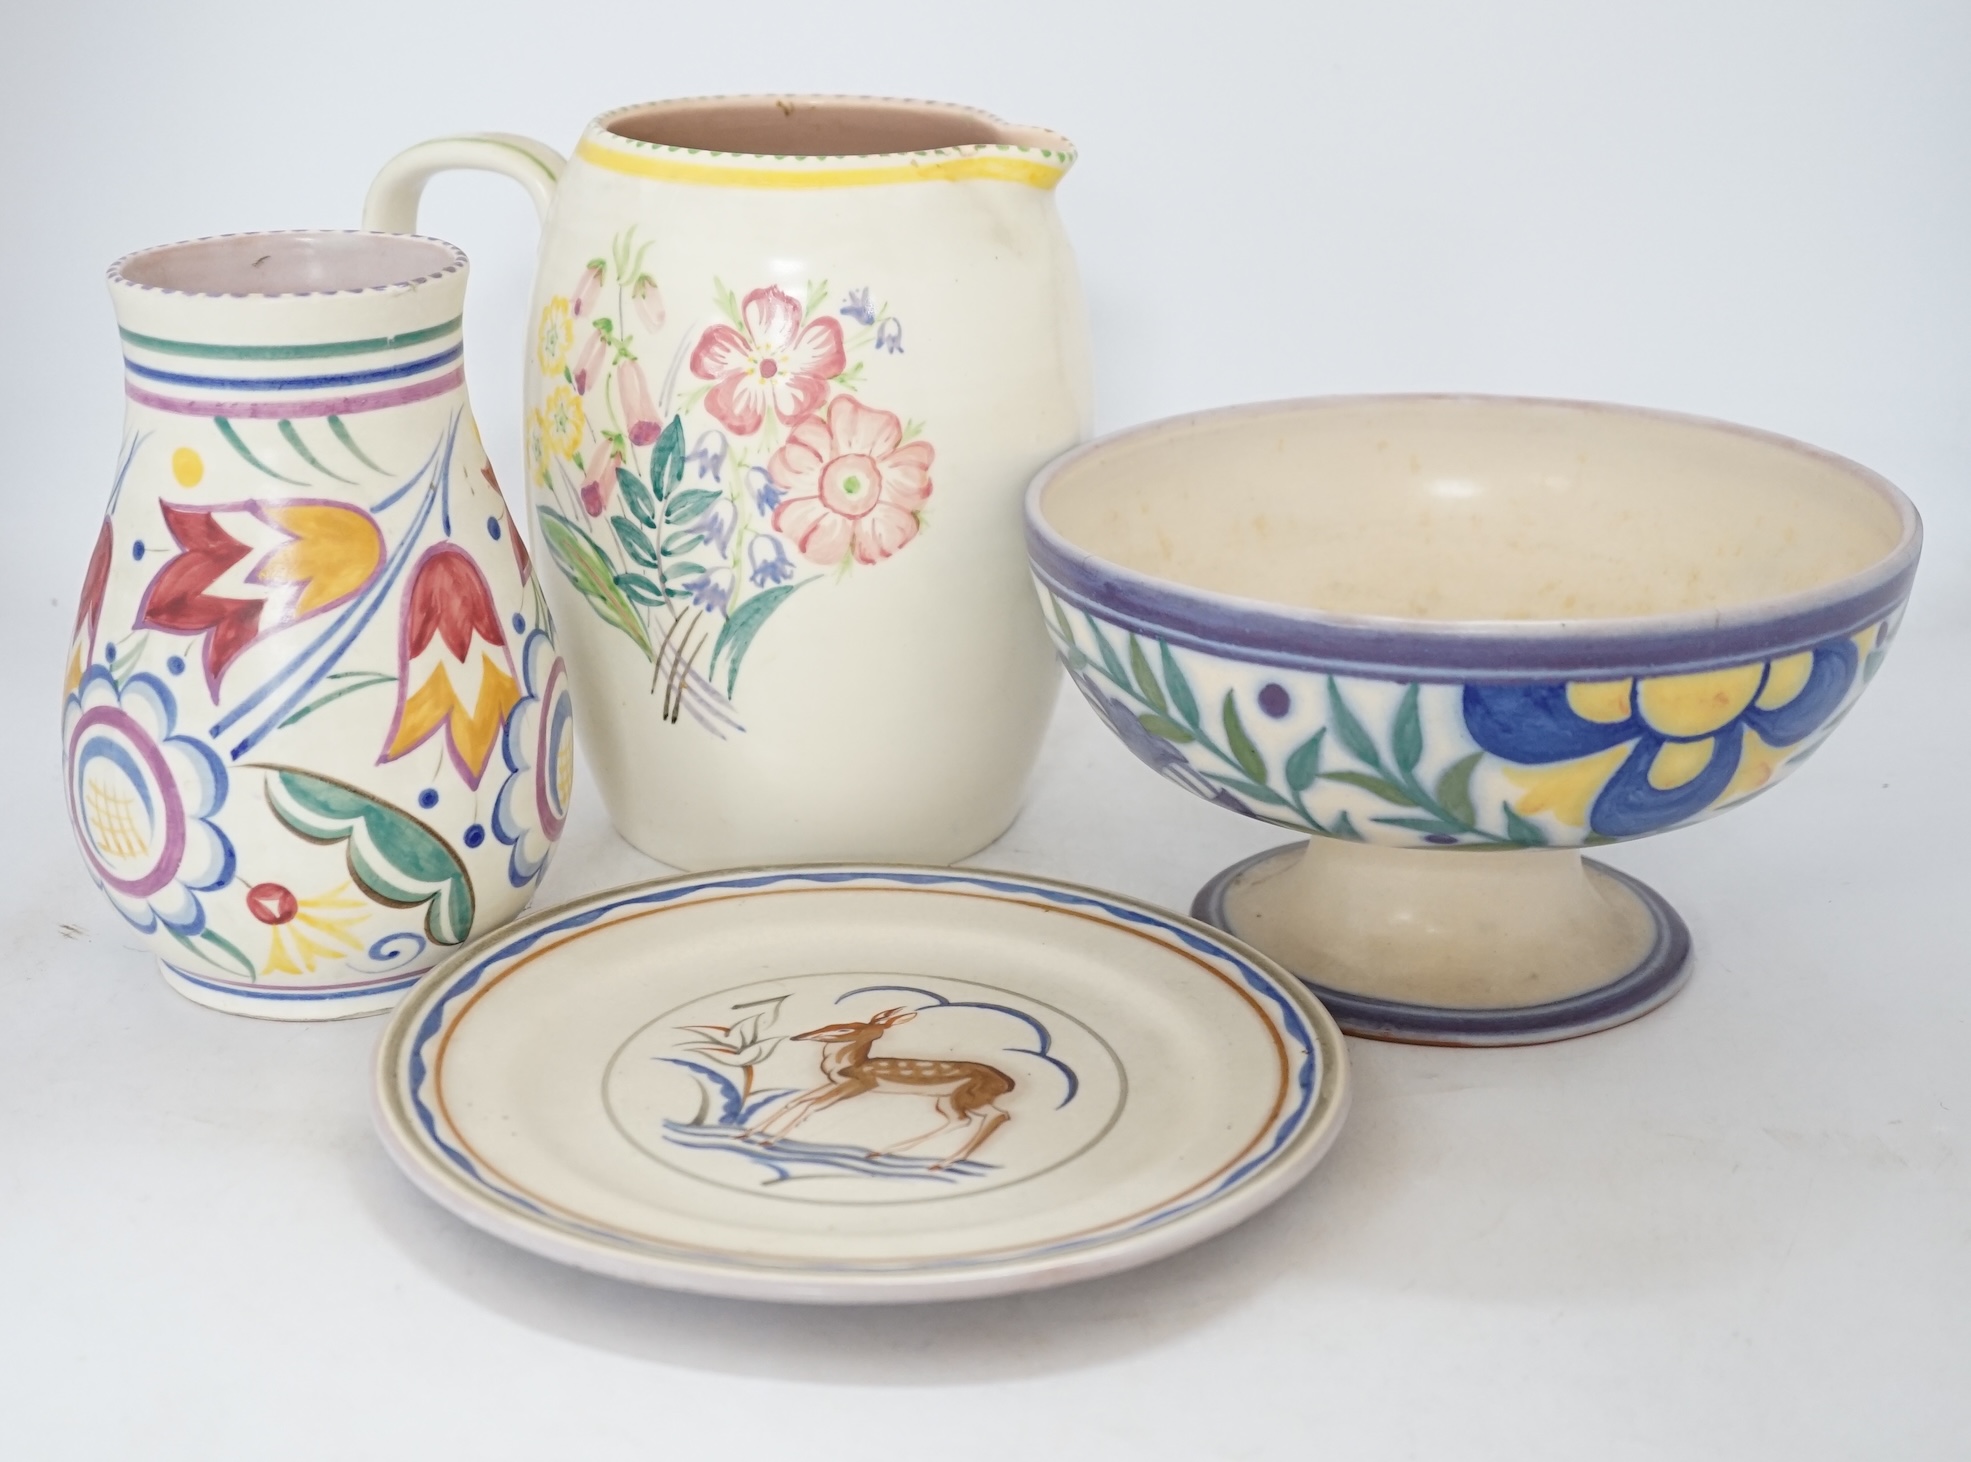 Eleven items of Poole pottery, from 1930’s to 50’s, including vases, jugs, mug and pedestal dish and pot and cover, tallest 19.5cm high. Condition - fair to good